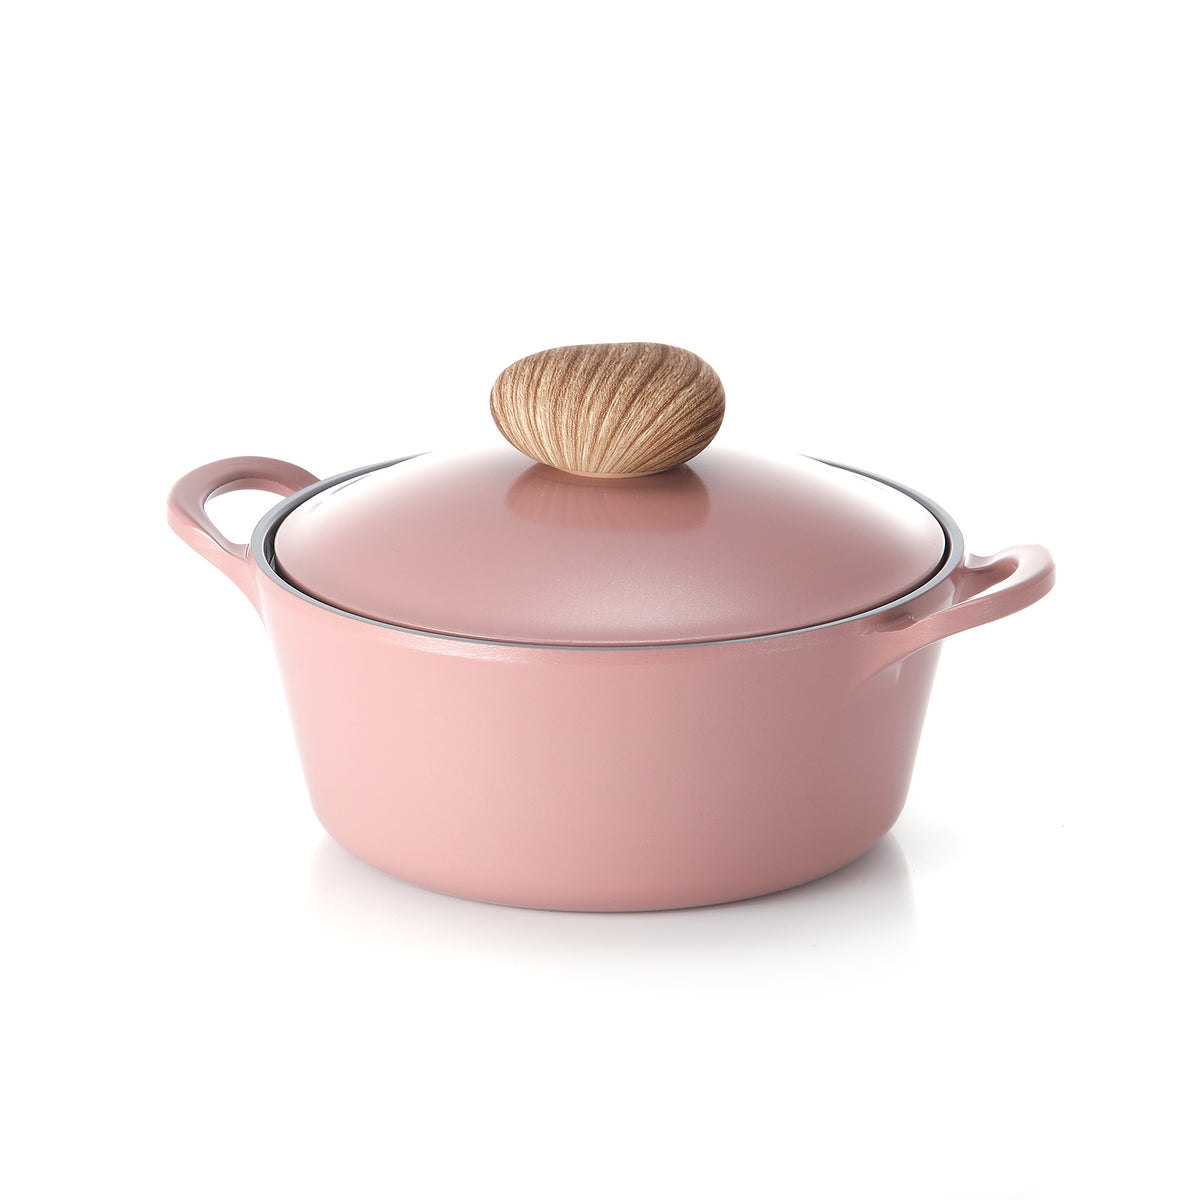 Neoflam Retro 22cm Stockpot Induction with Die-Cast Lid Pink Demer